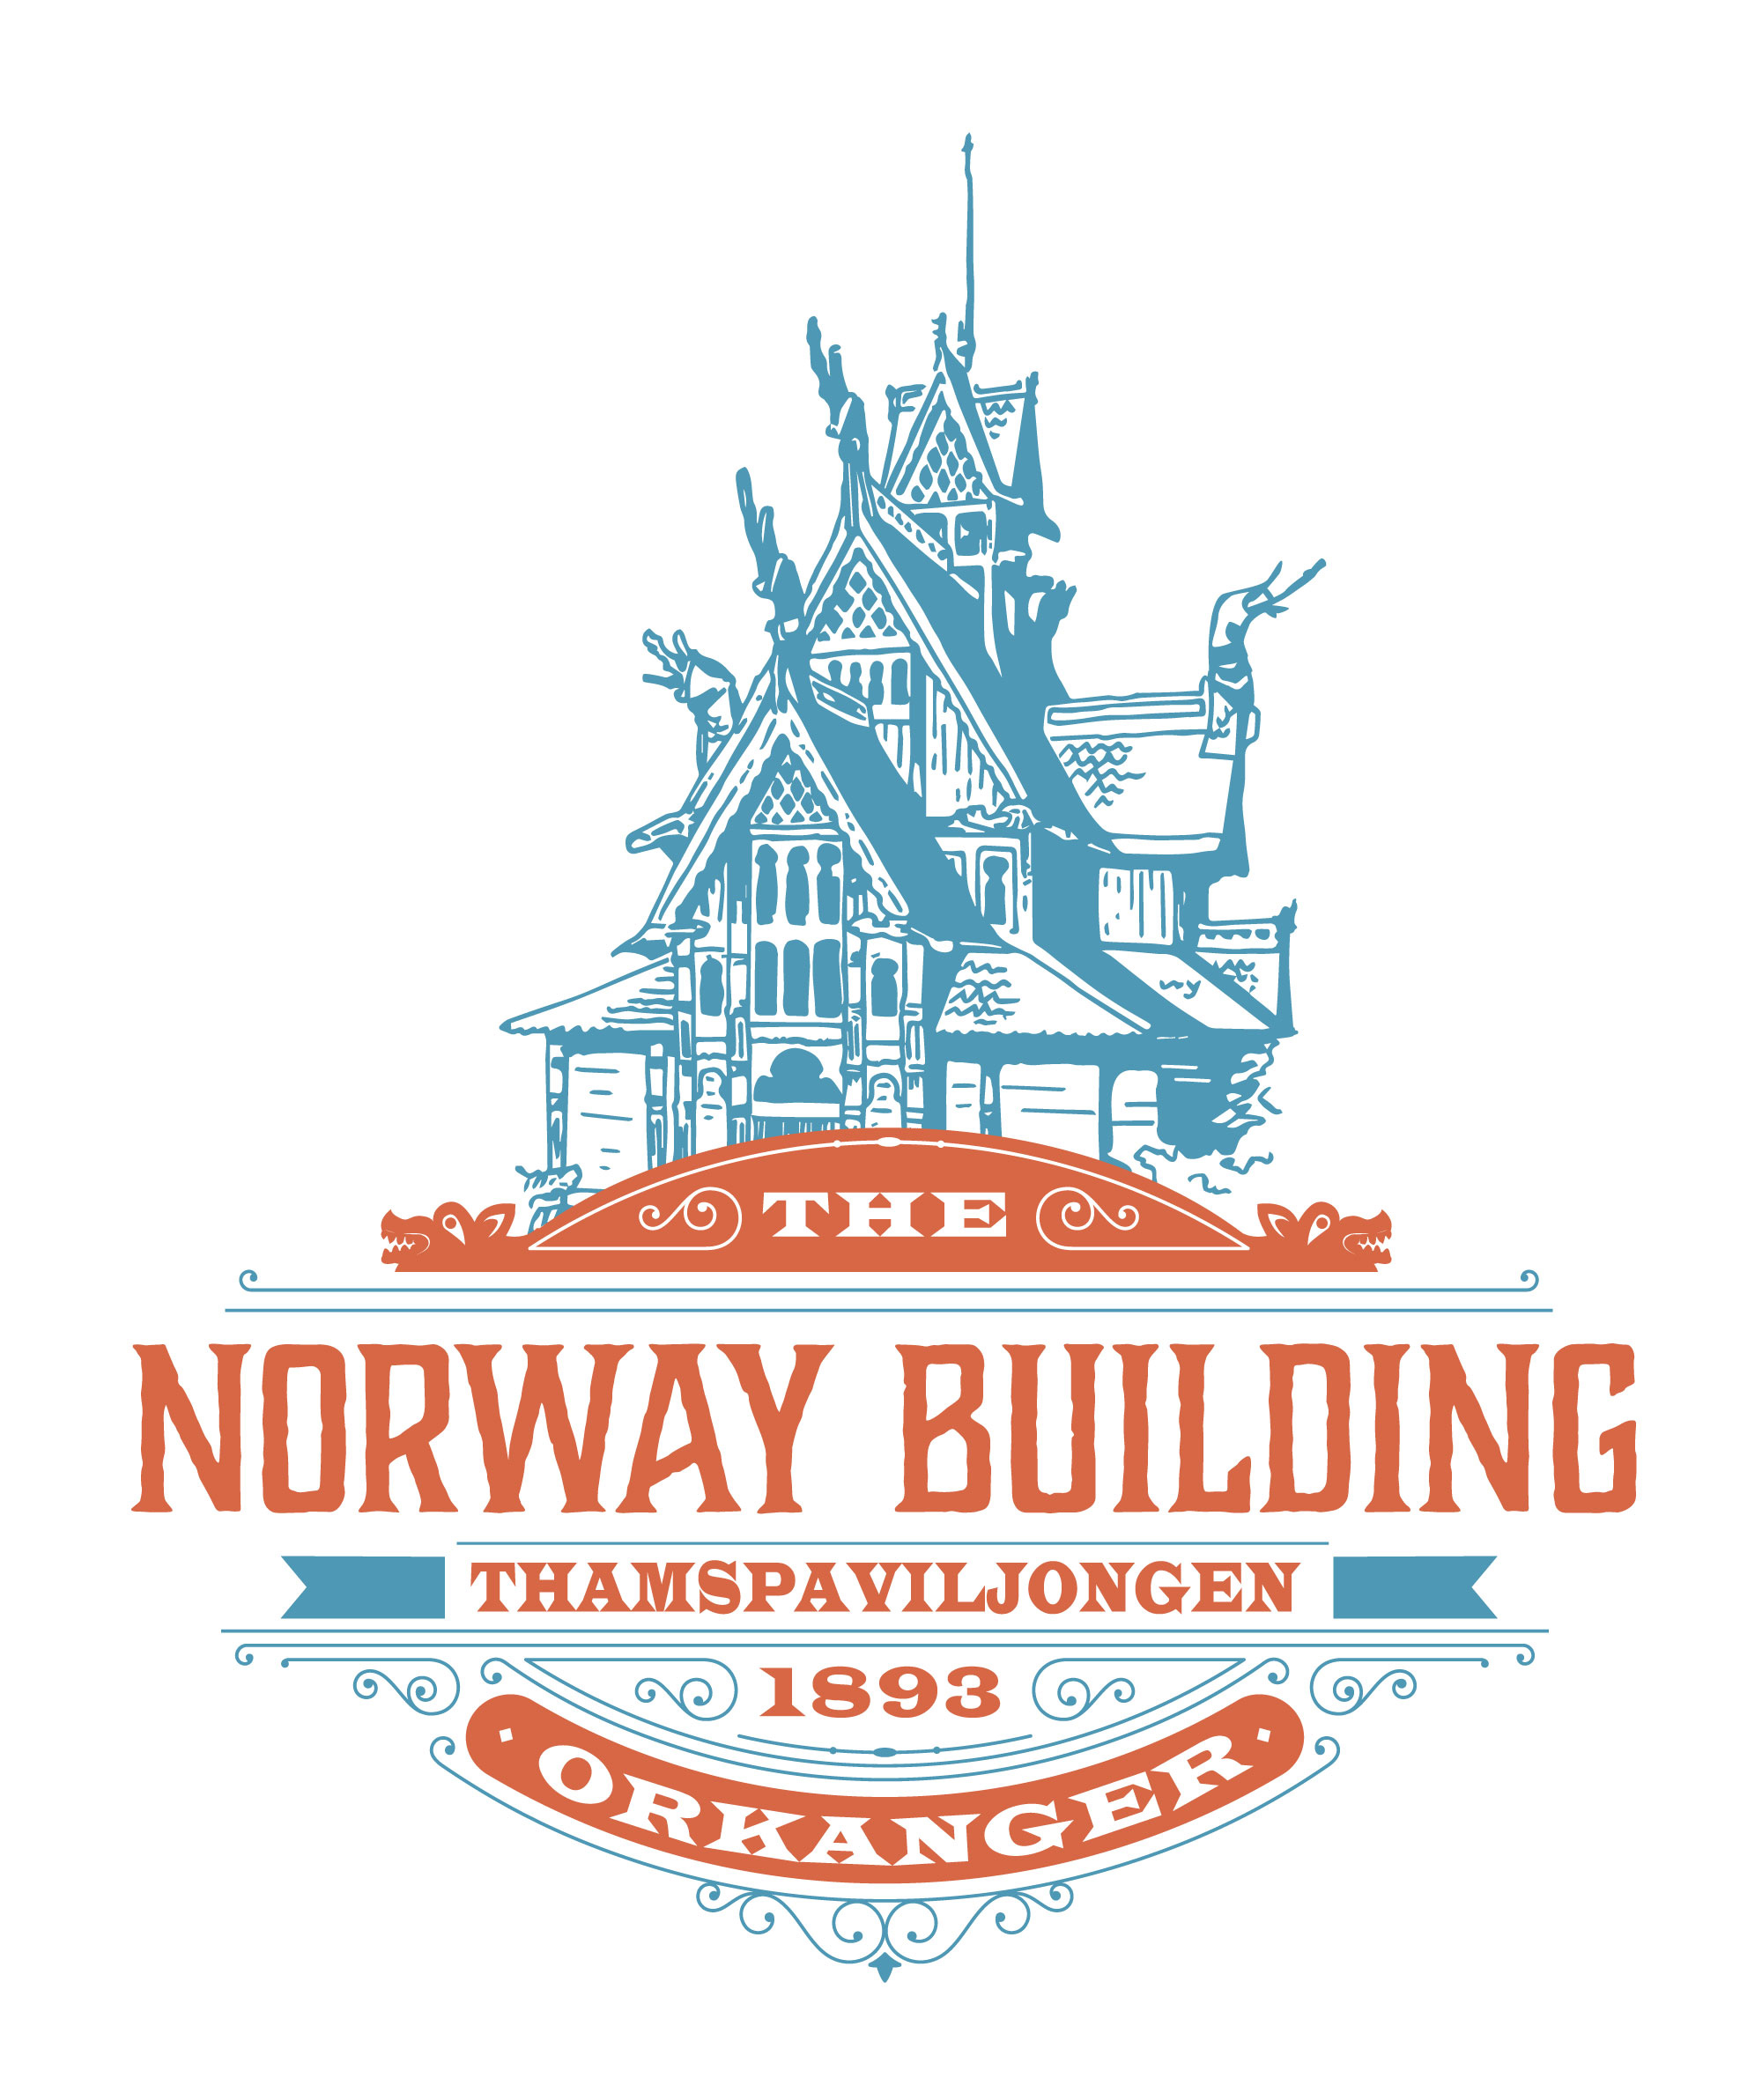 The Norway Building